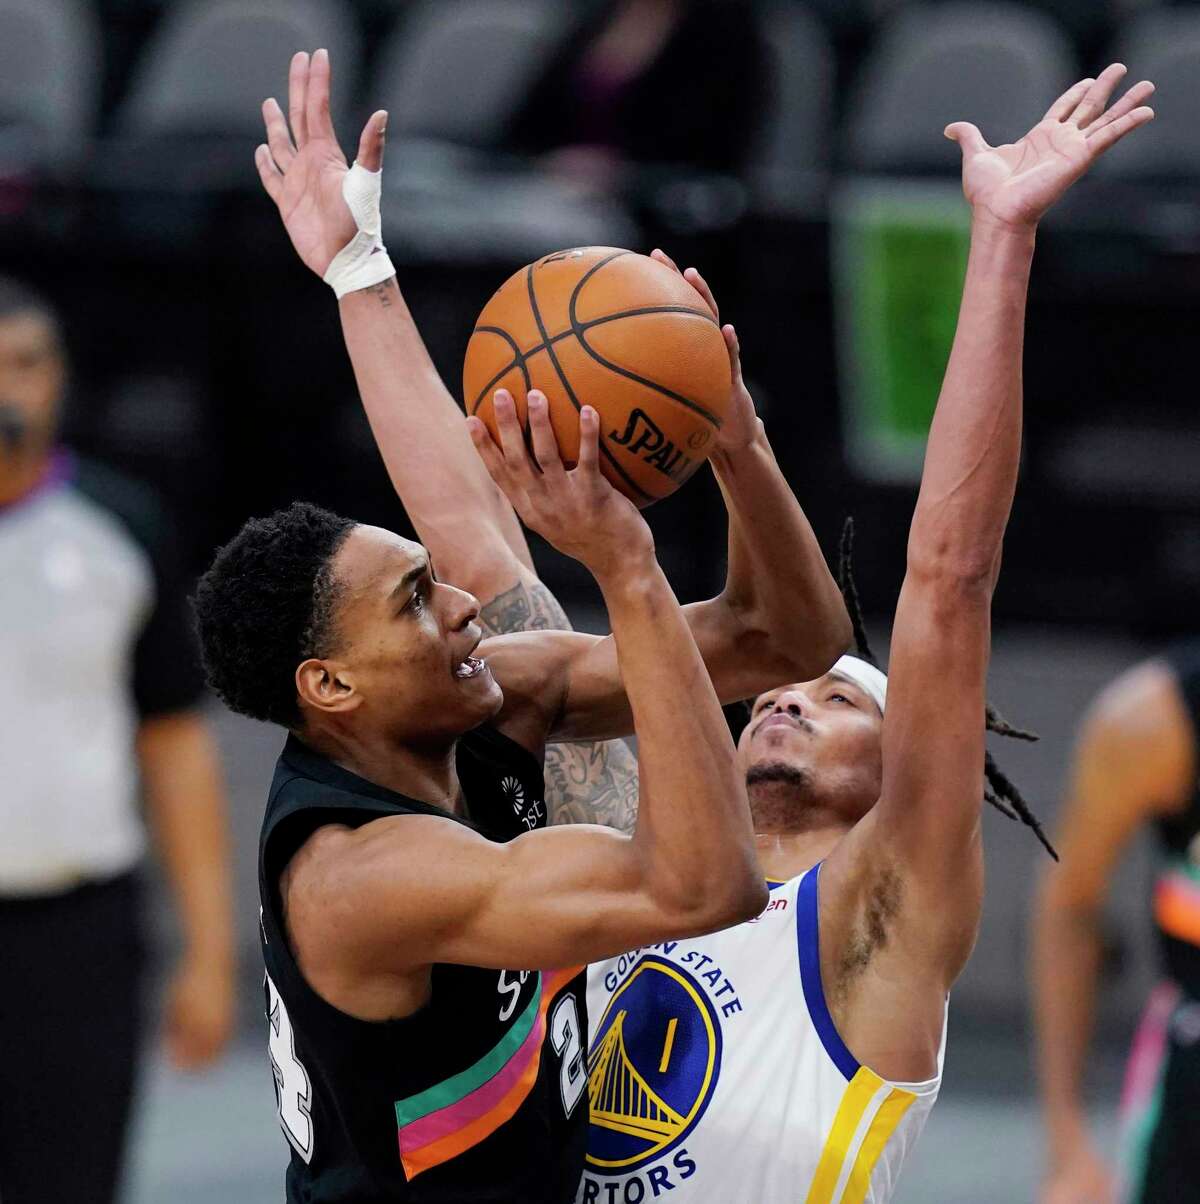 San Antonio Spurs guard Devin Vassell (24) shoots over Golden State Warriors guard Damion Lee (1) during the first half of an NBA basketball game in San Antonio, Tuesday, Feb. 9, 2021. (AP Photo/Eric Gay)